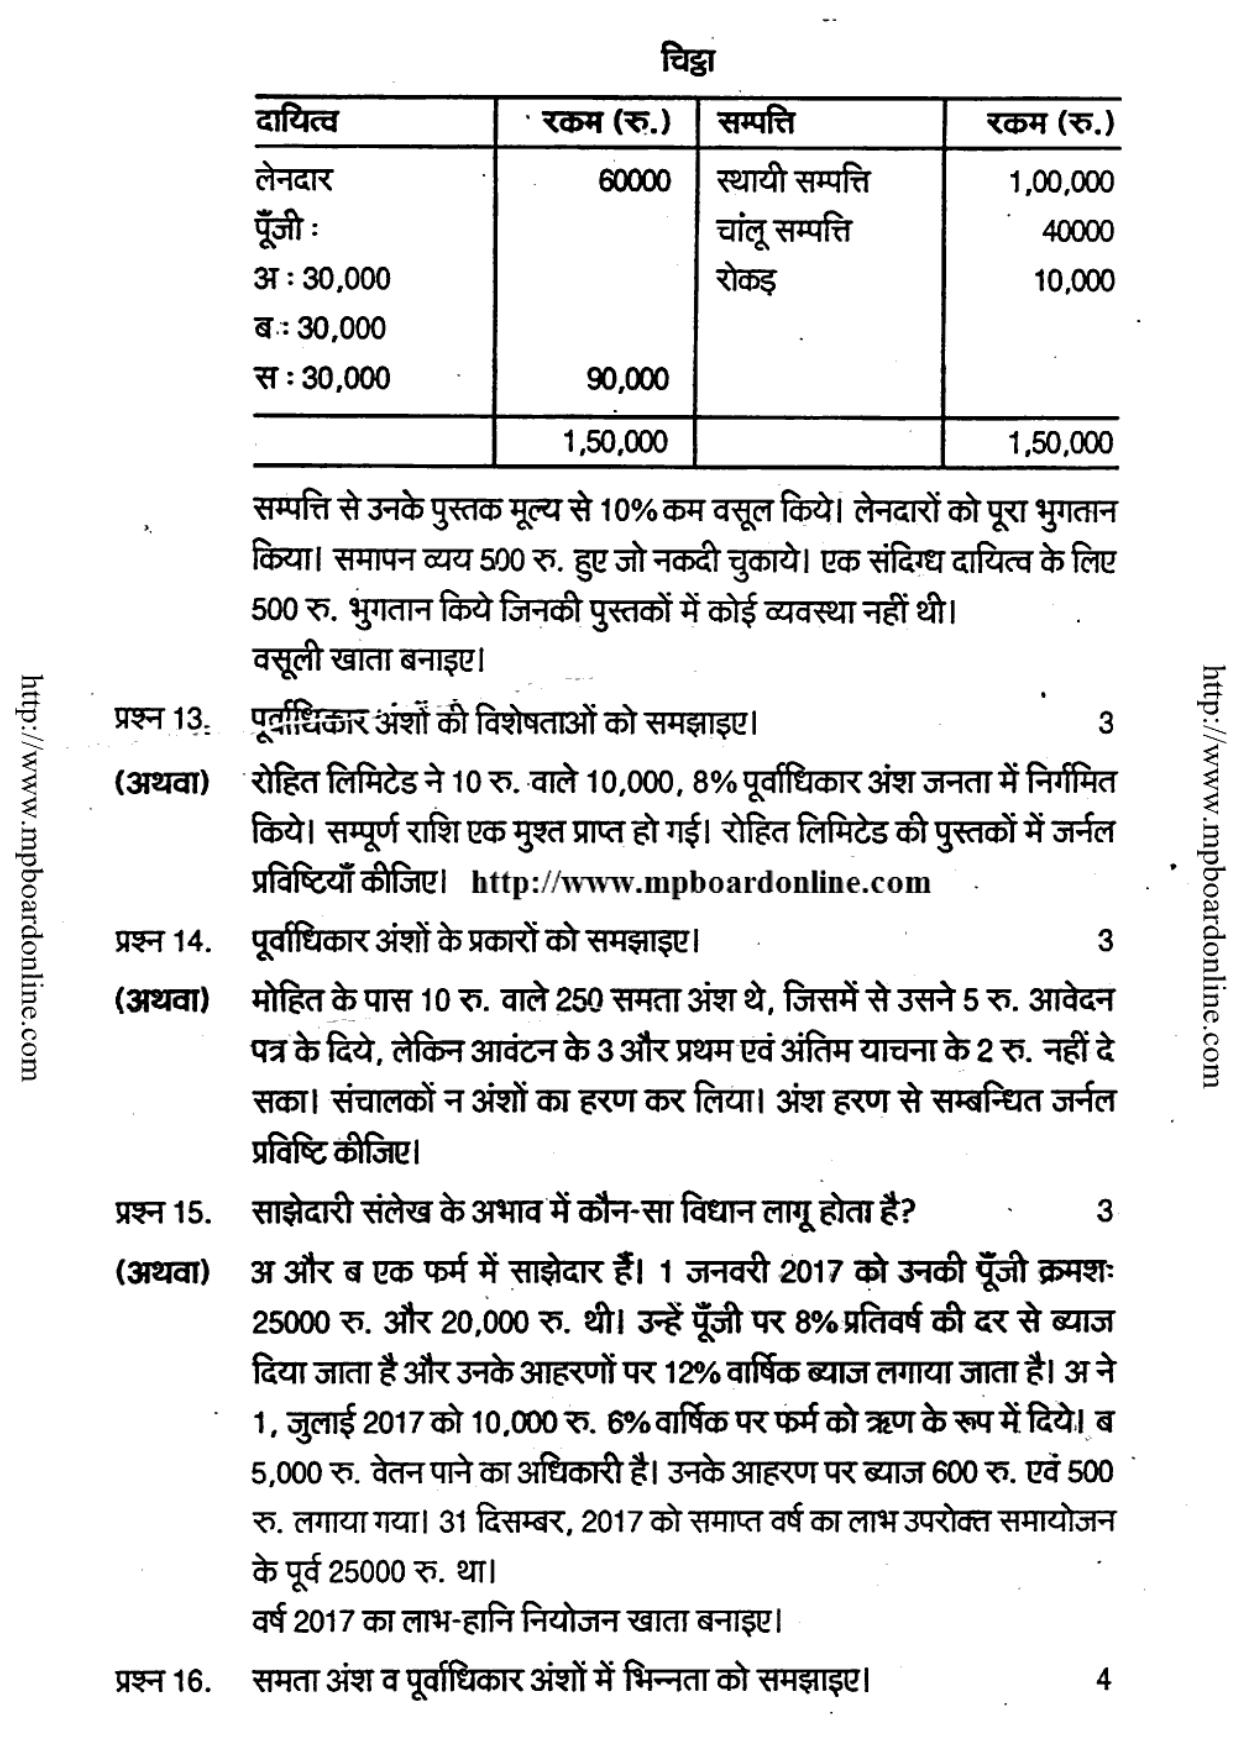 MP Board Class 12 Book Keeping And Accountancy 2018 Question Paper - Page 10